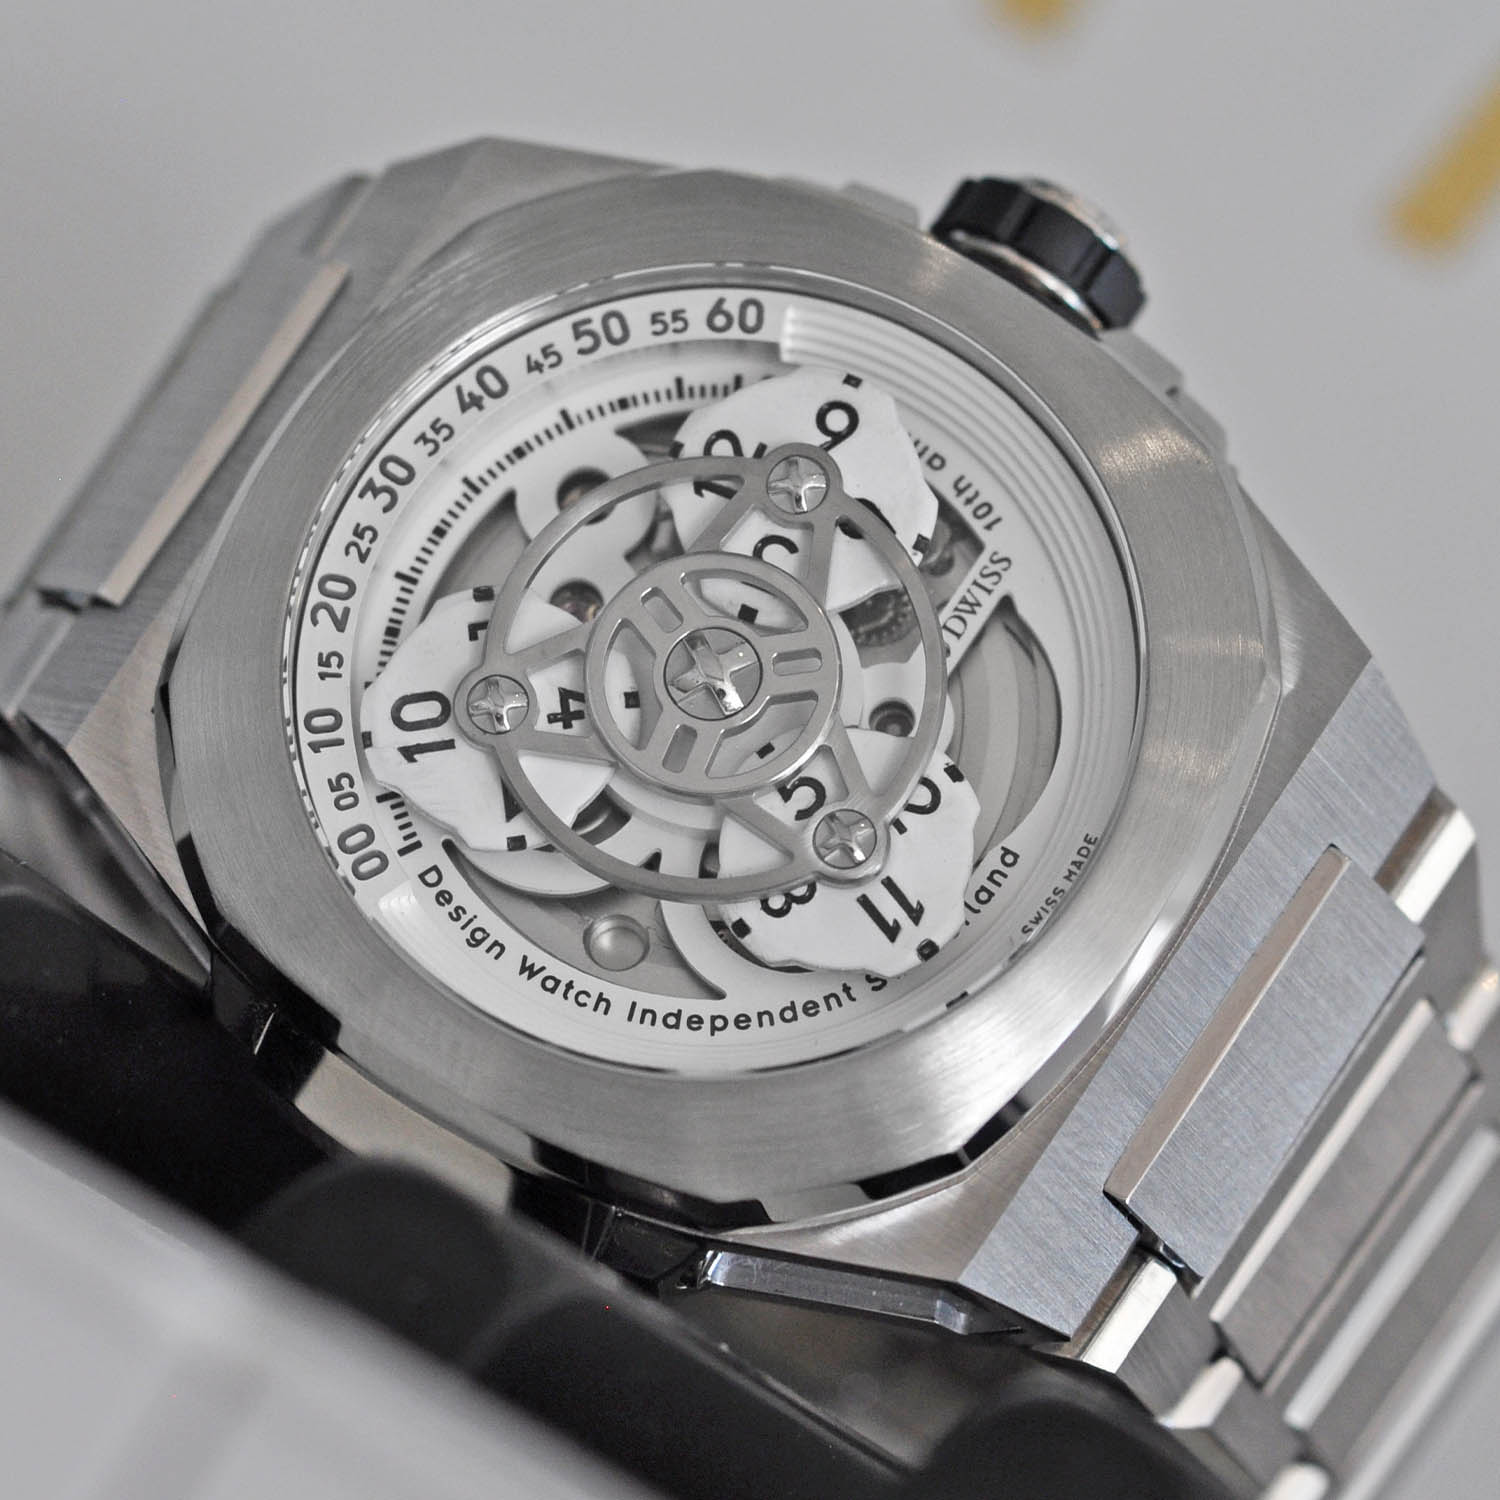 DWISS M3W Wandering Hour 10th Anniversary Limited Edition